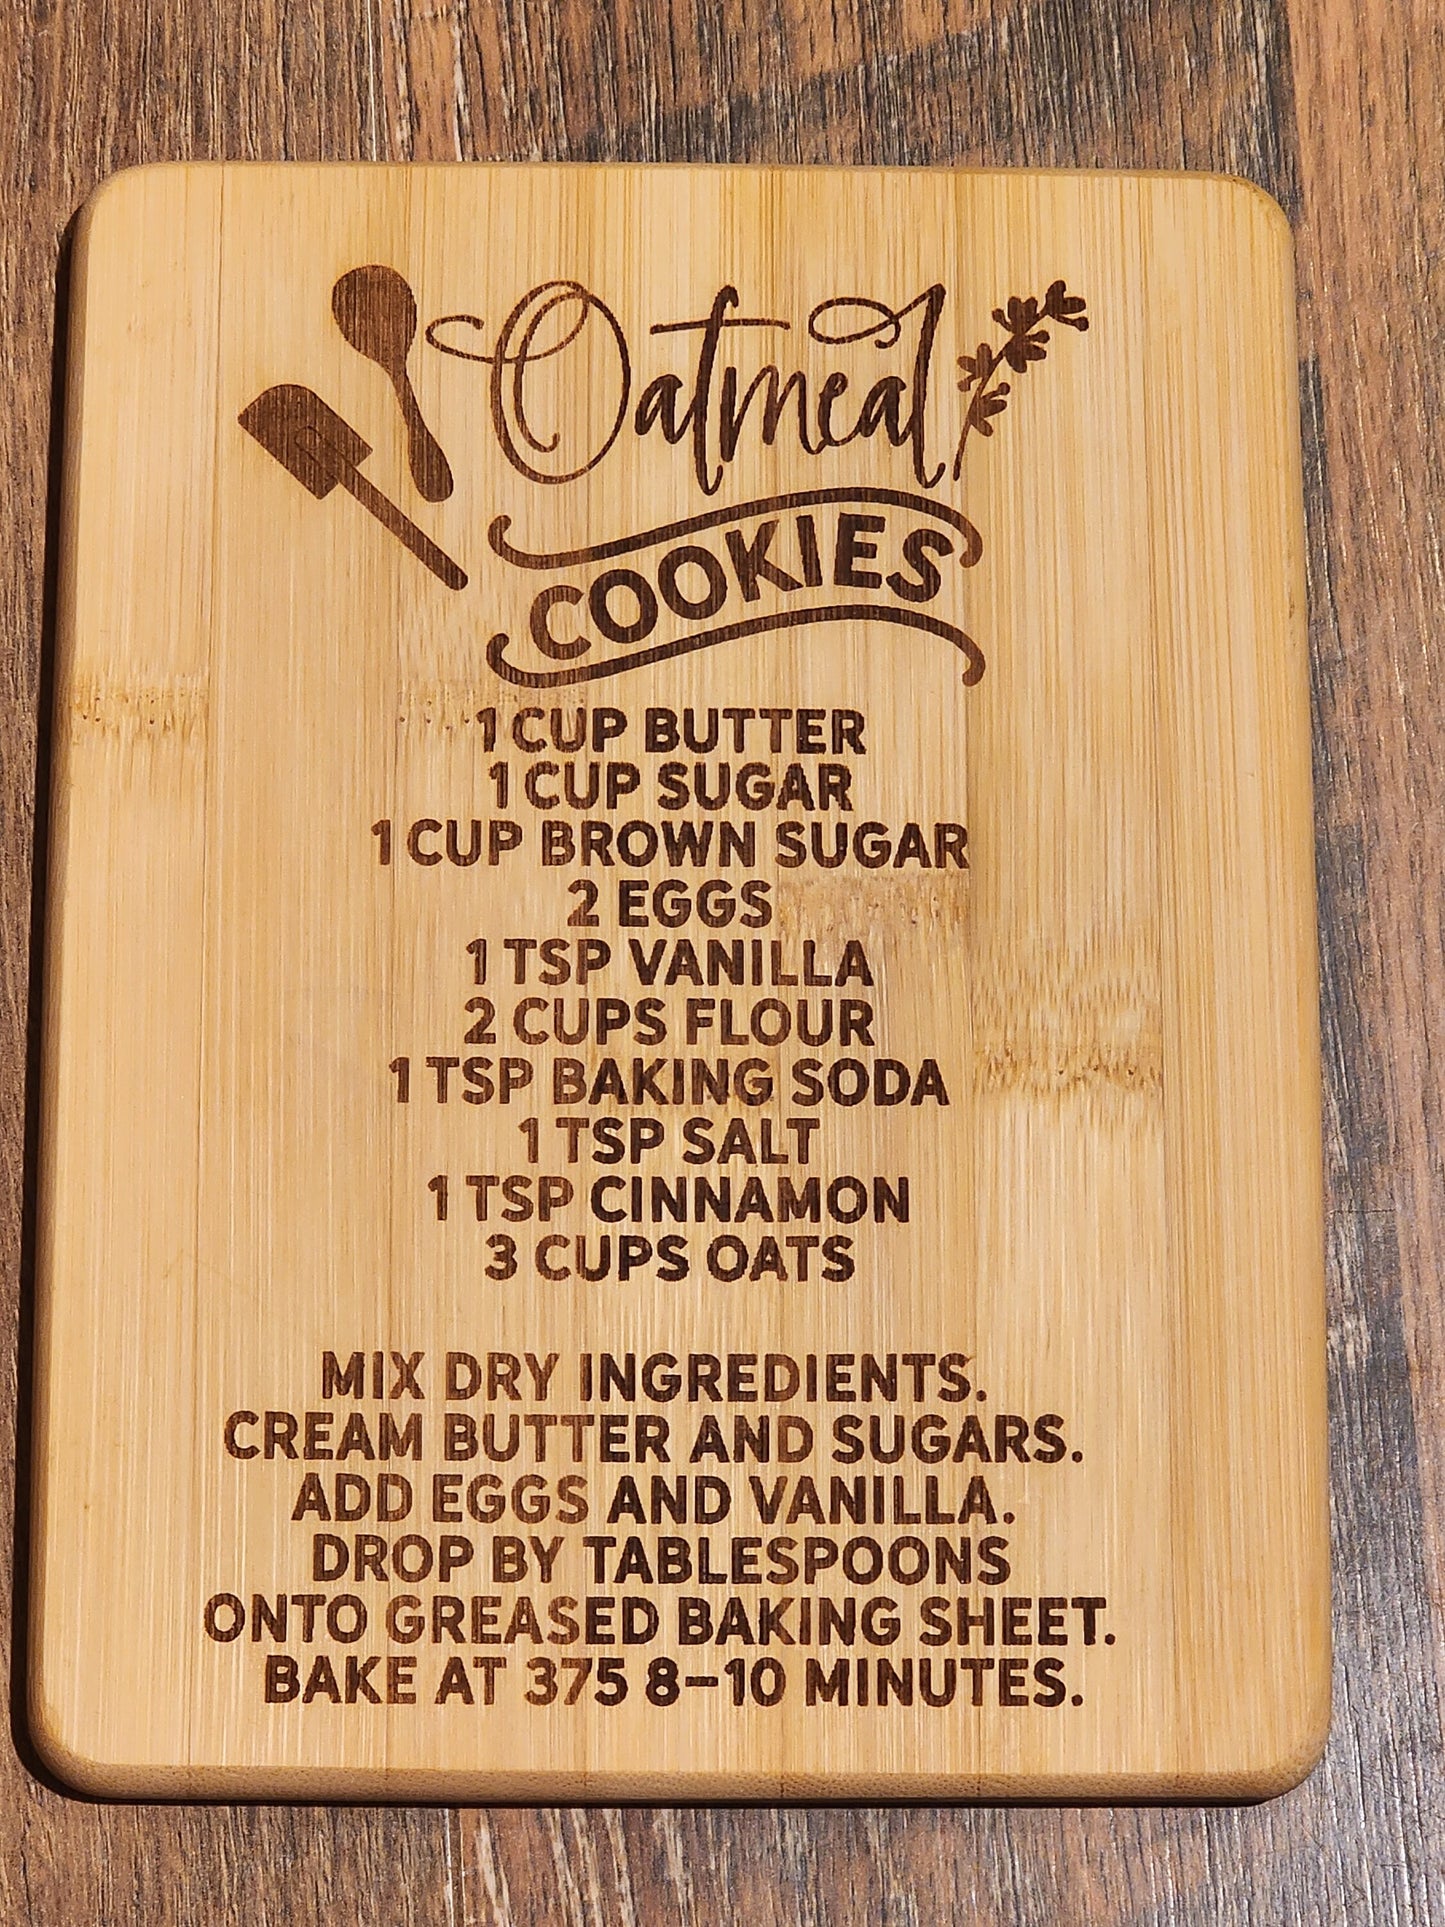 Oatmeal Cookie Recipe, country etched Bamboo Wood Cutting Board  - 8.75 x 6.875 inches